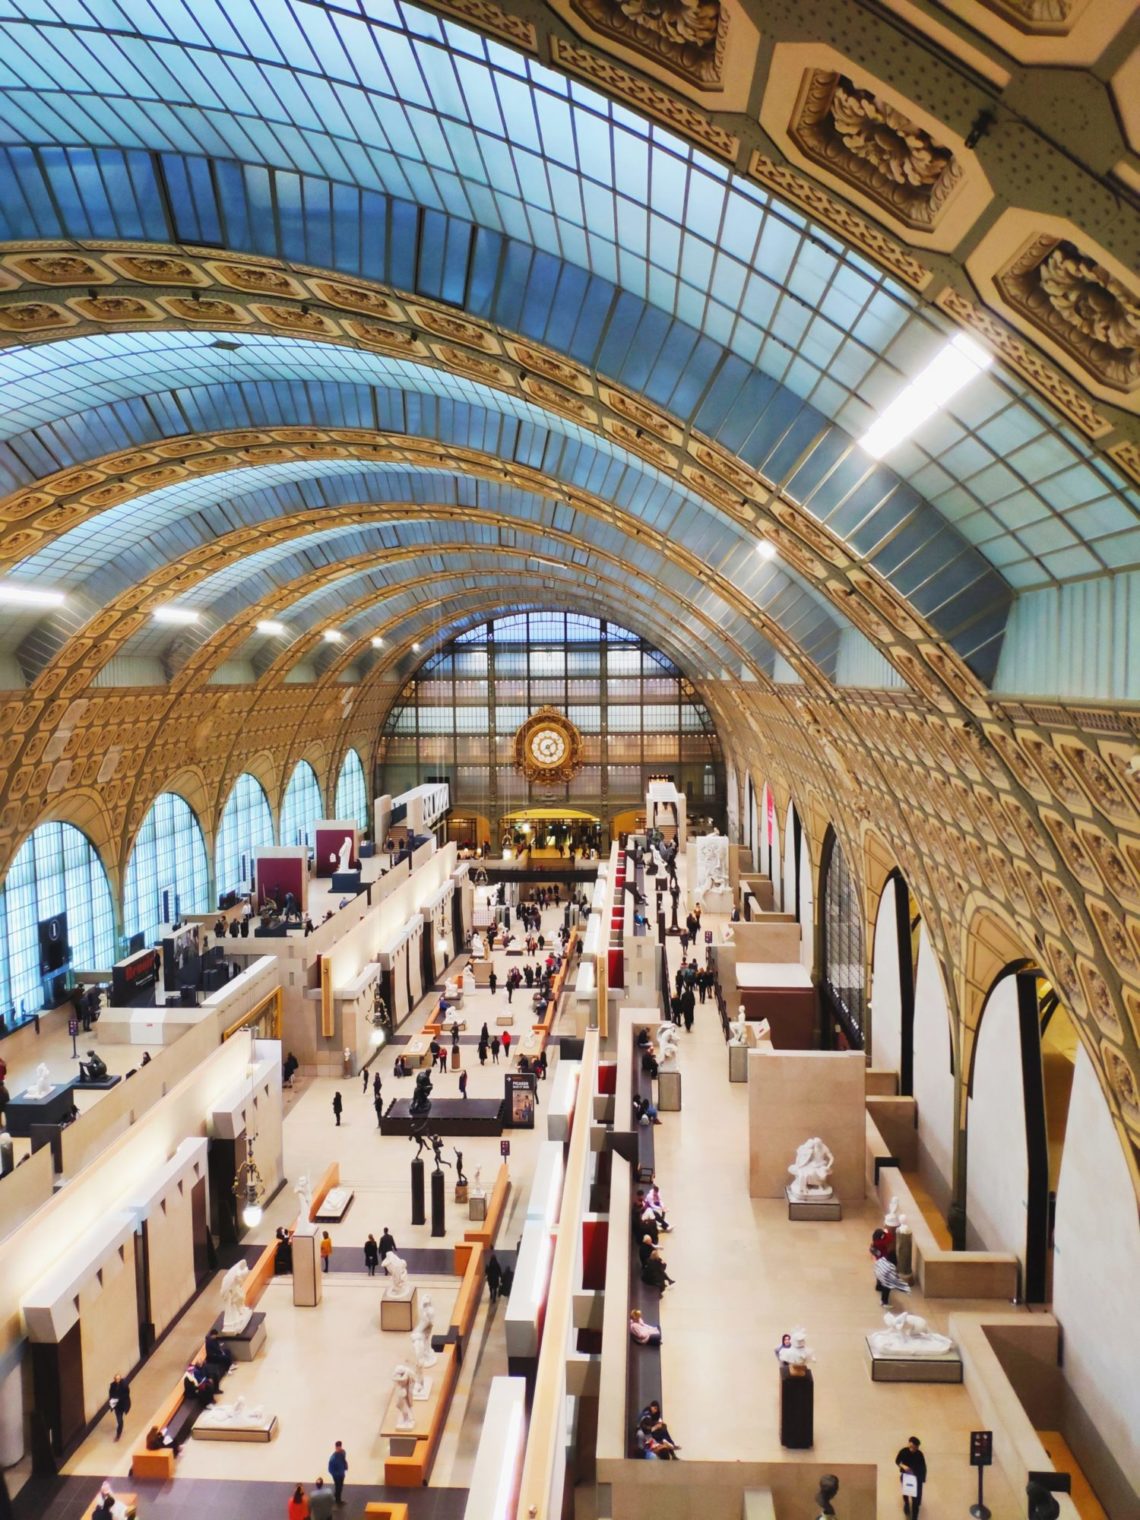 d'Orsay museum view